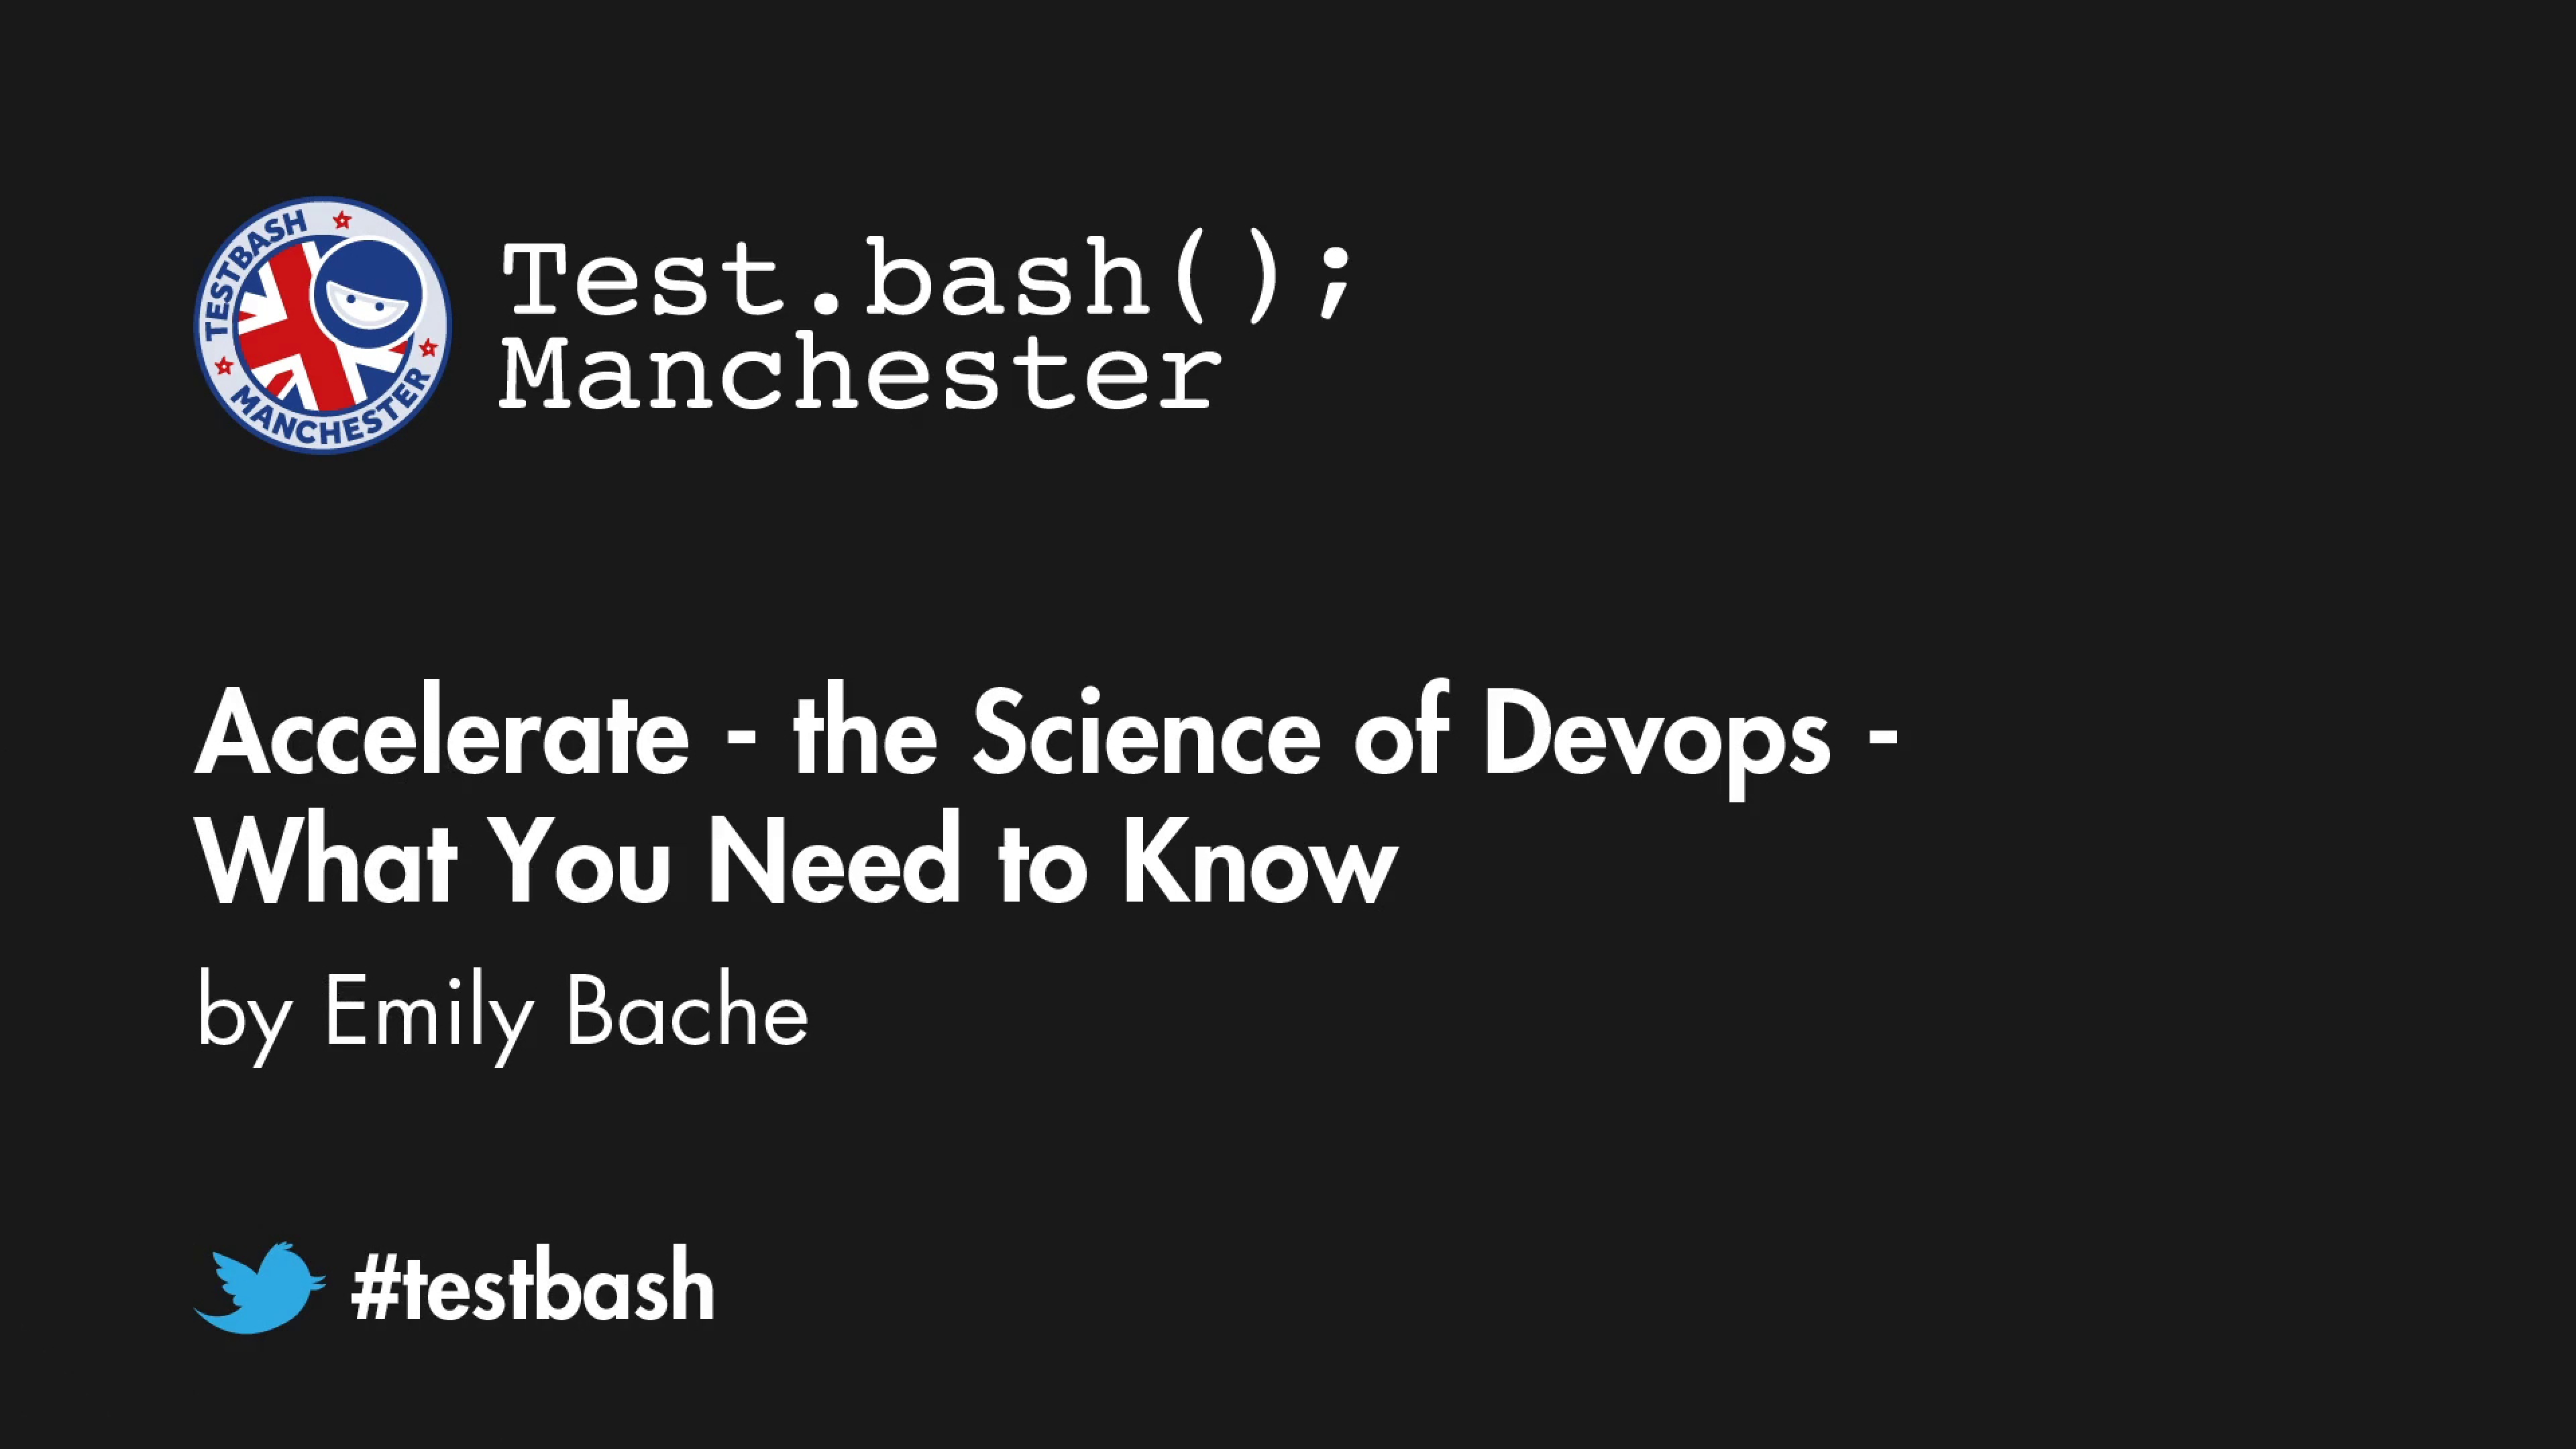 Accelerate: The Science of DevOps - What You Need to Know - Emily Bache